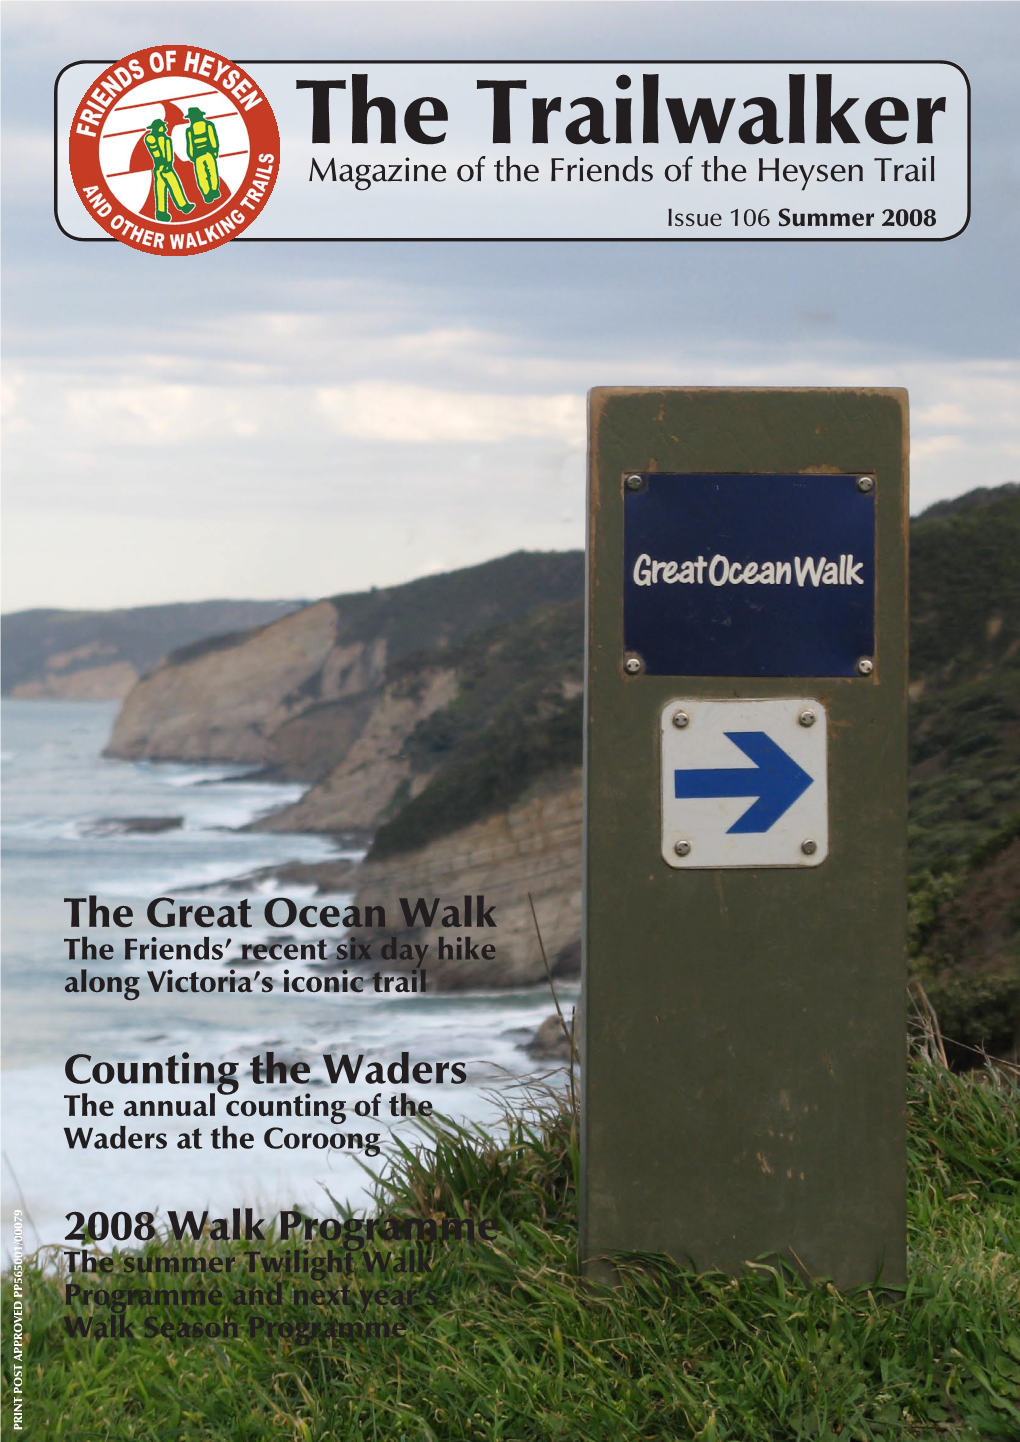 The Trailwalker Magazine of the Friends of the Heysen Trail Issue 106 Summer 2008